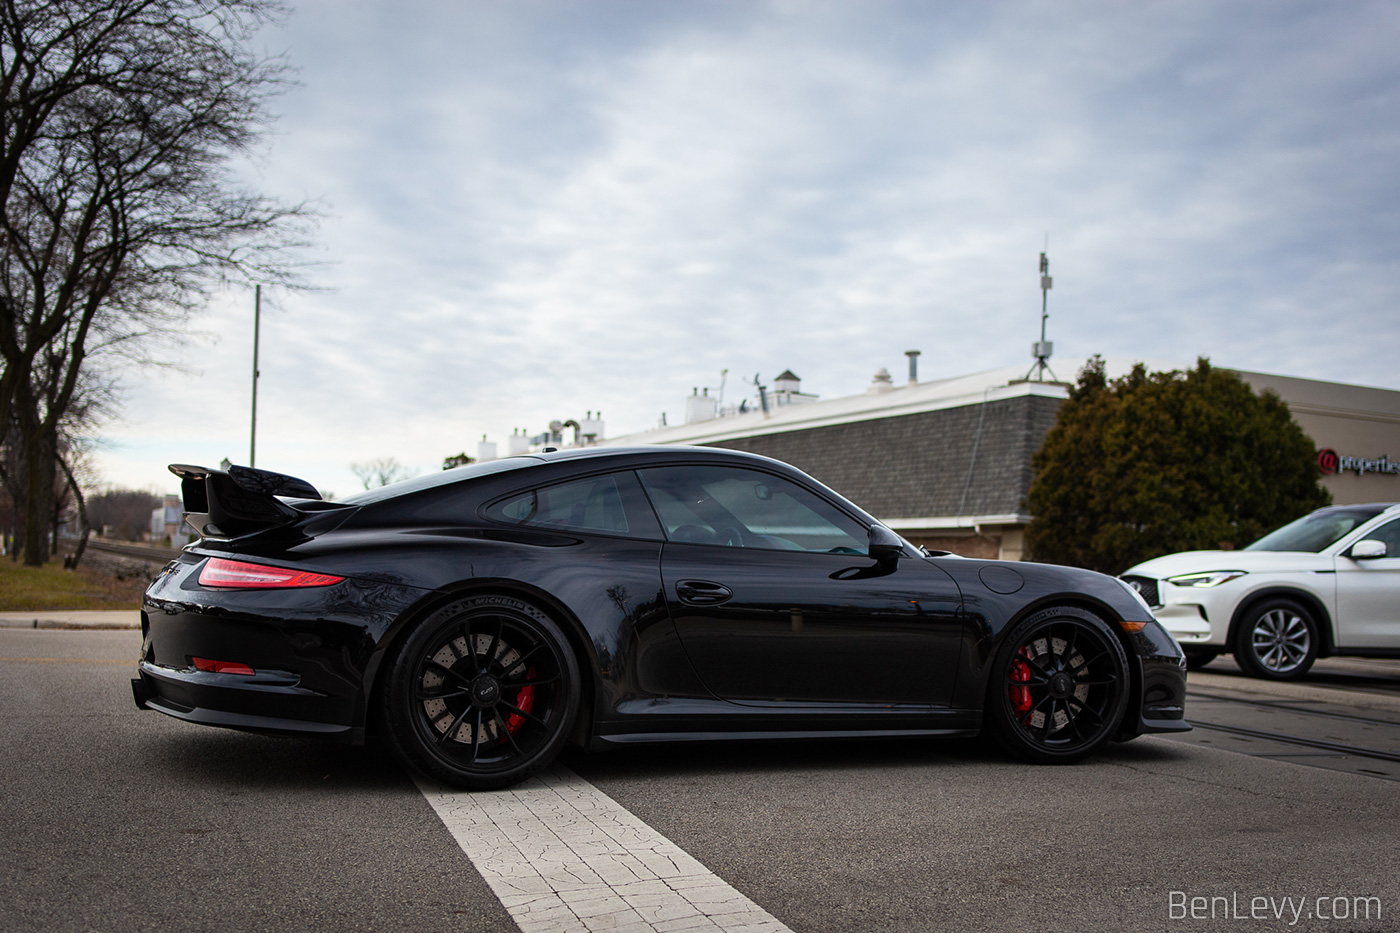 Black 991 GT3 on the road in Hinsdale